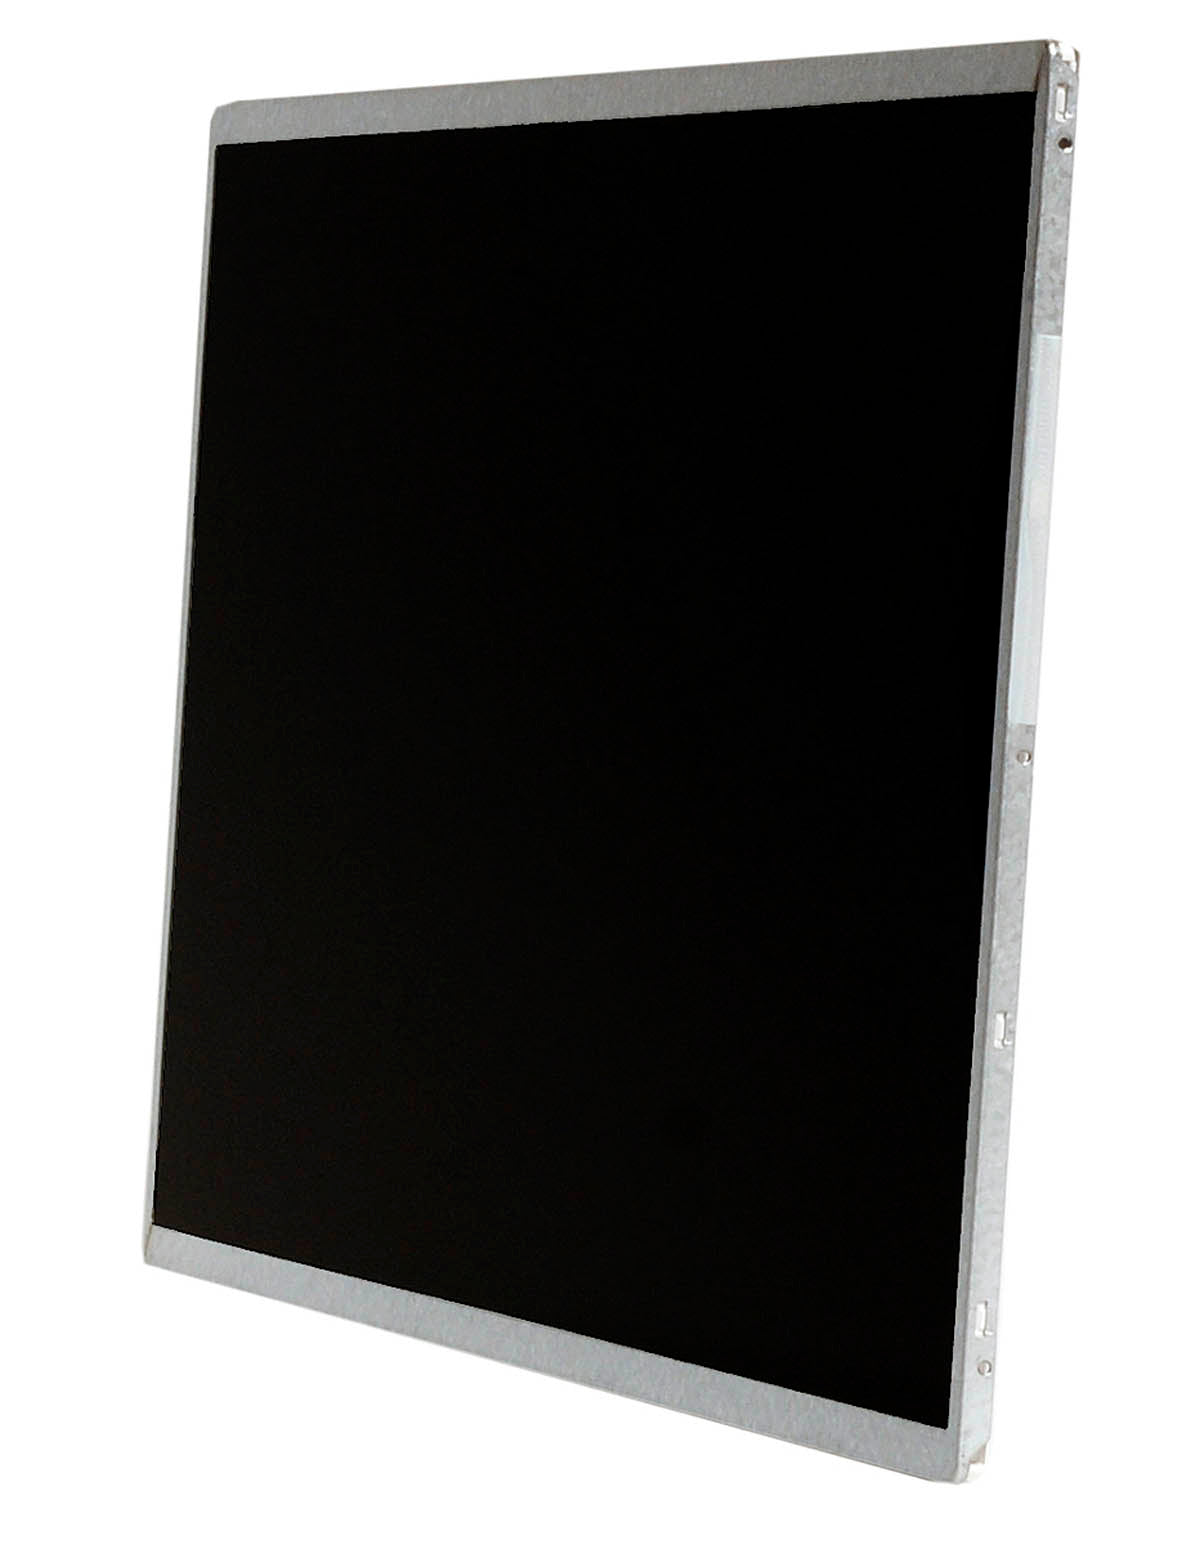 Replacement Screen For LTN140AT26-H01 HD 1366x768 Glossy LCD LED Display